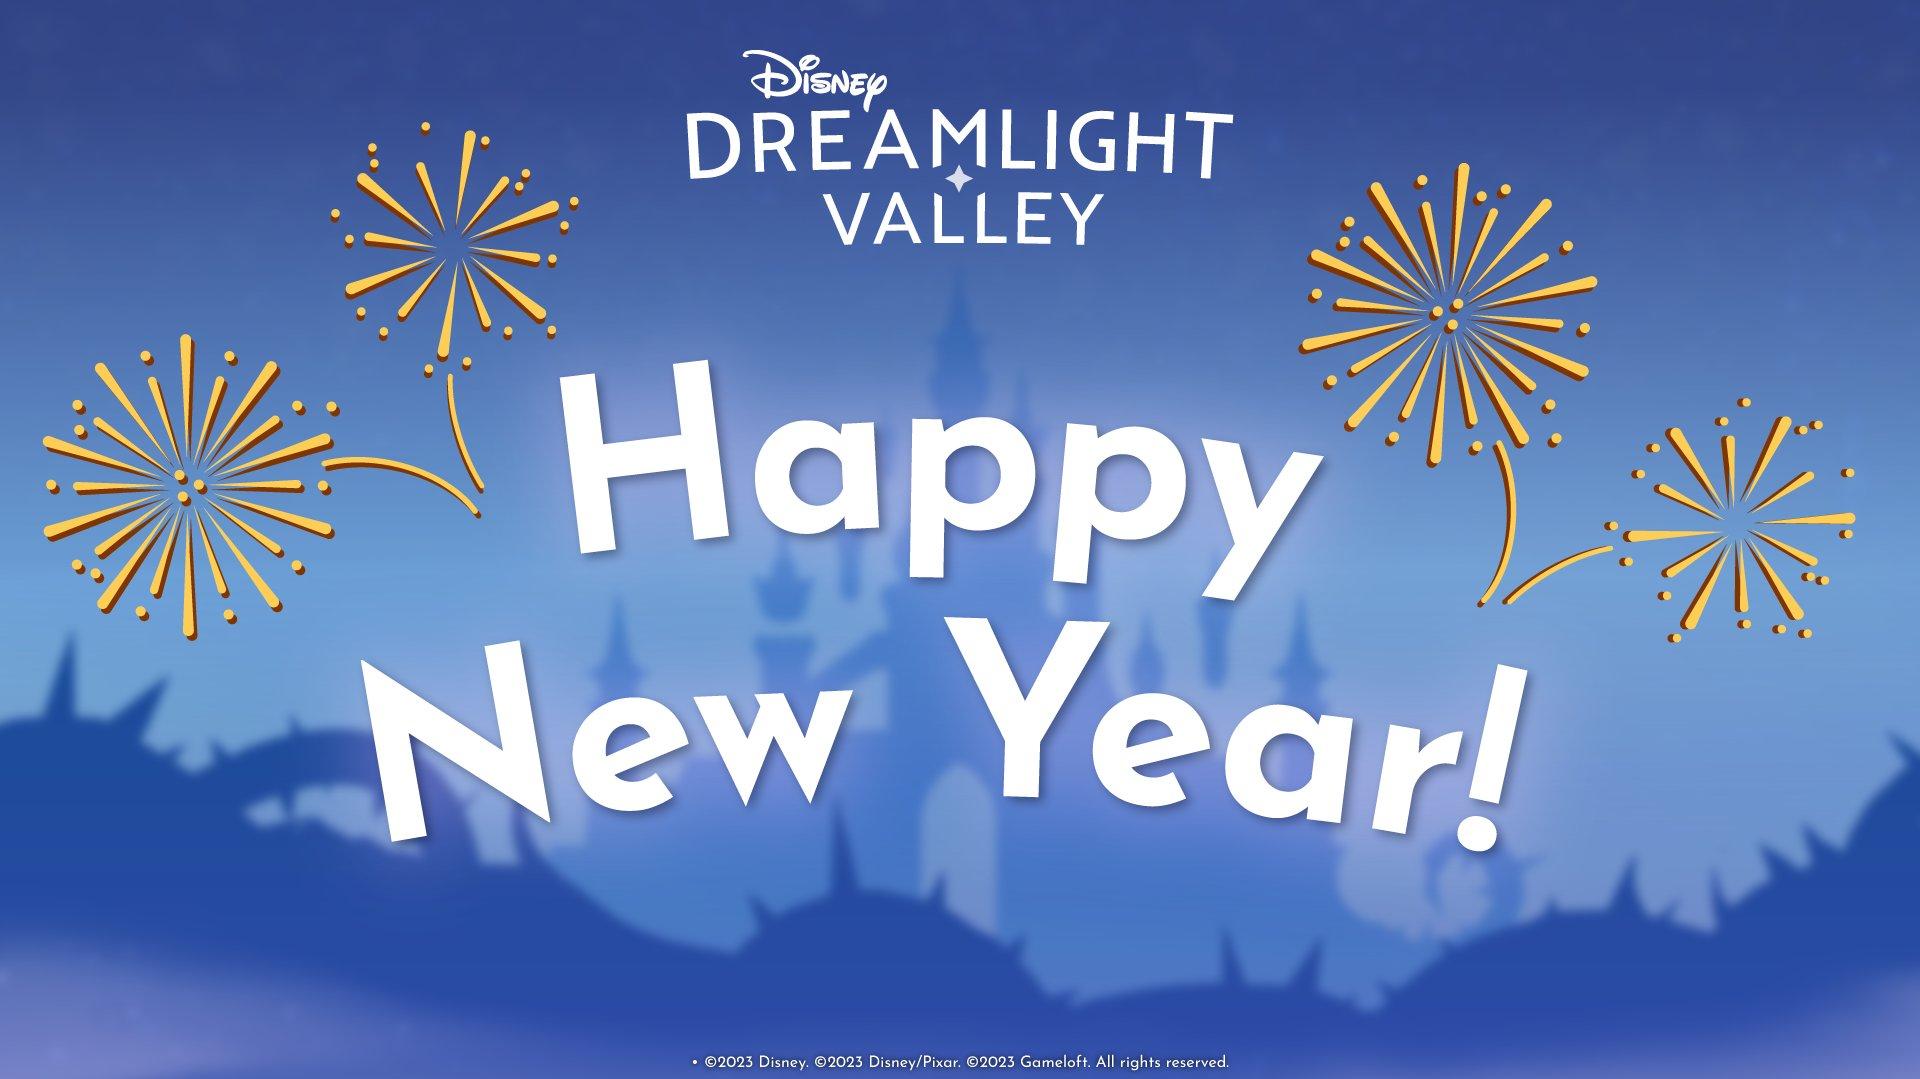 Disney Dreamlight Valley on Happy New Year from the team